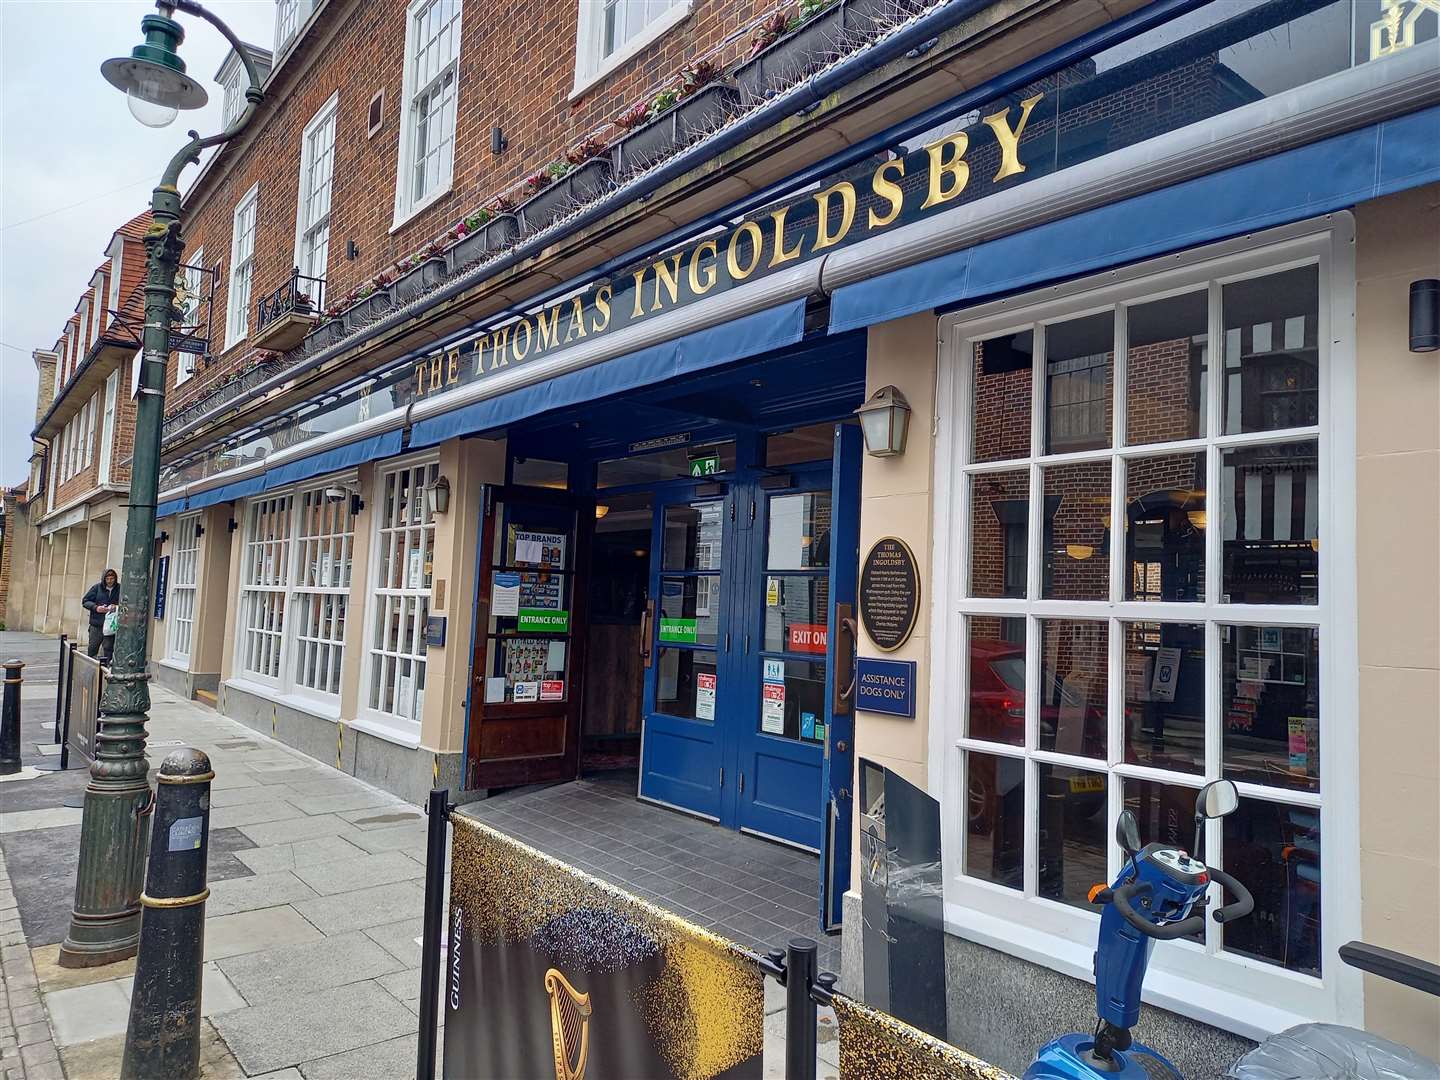 Wetherspoon bosses "are still investigating the exact circumstances of the incident"